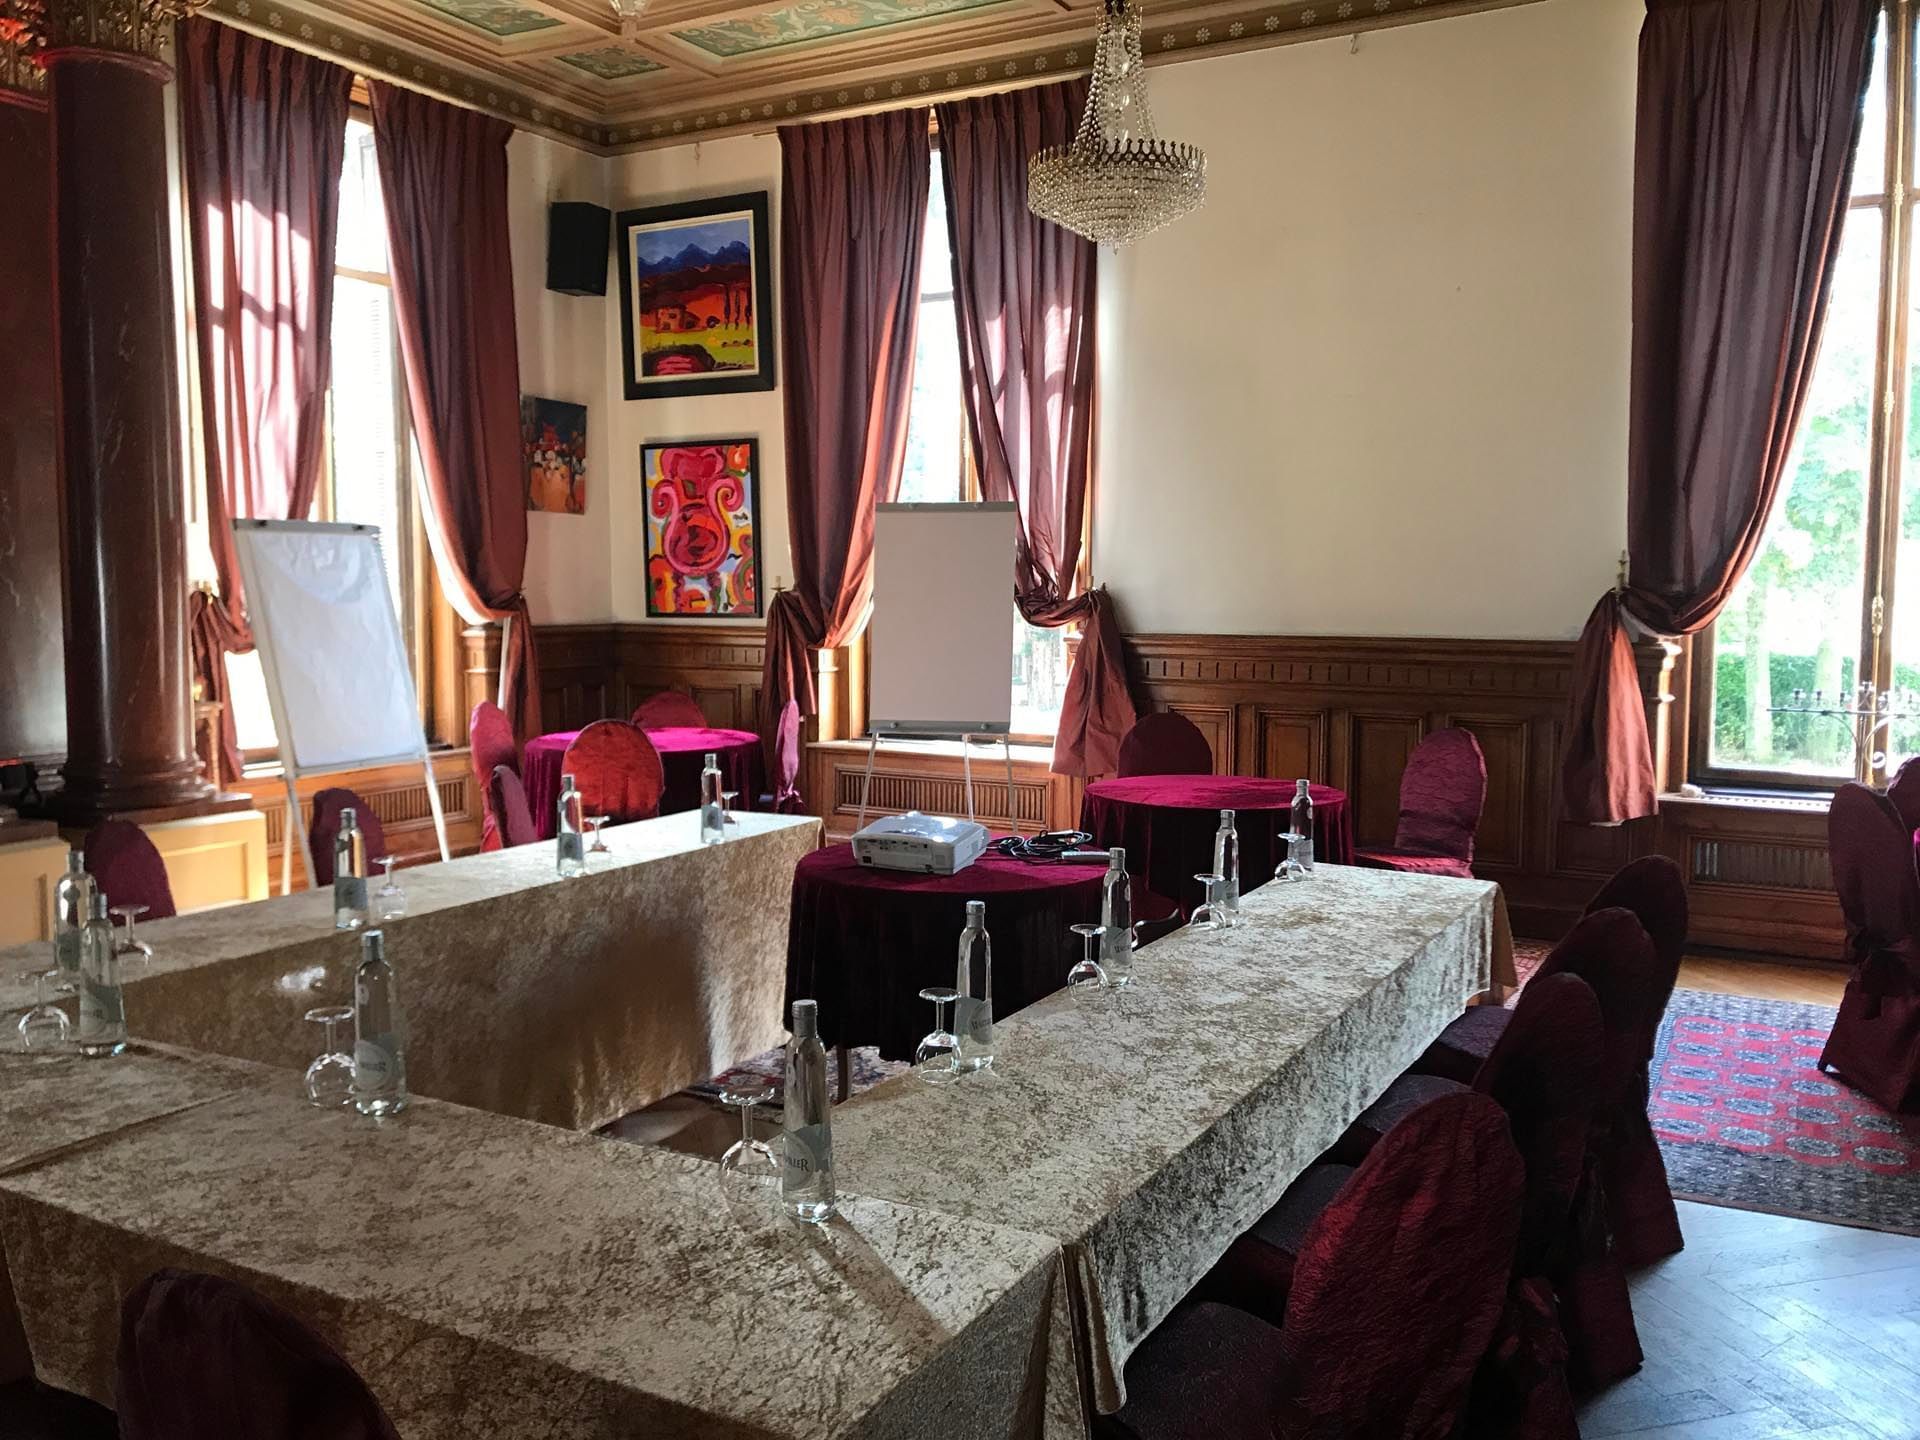 Meeting Room at Hotel Domaine de Beaupre